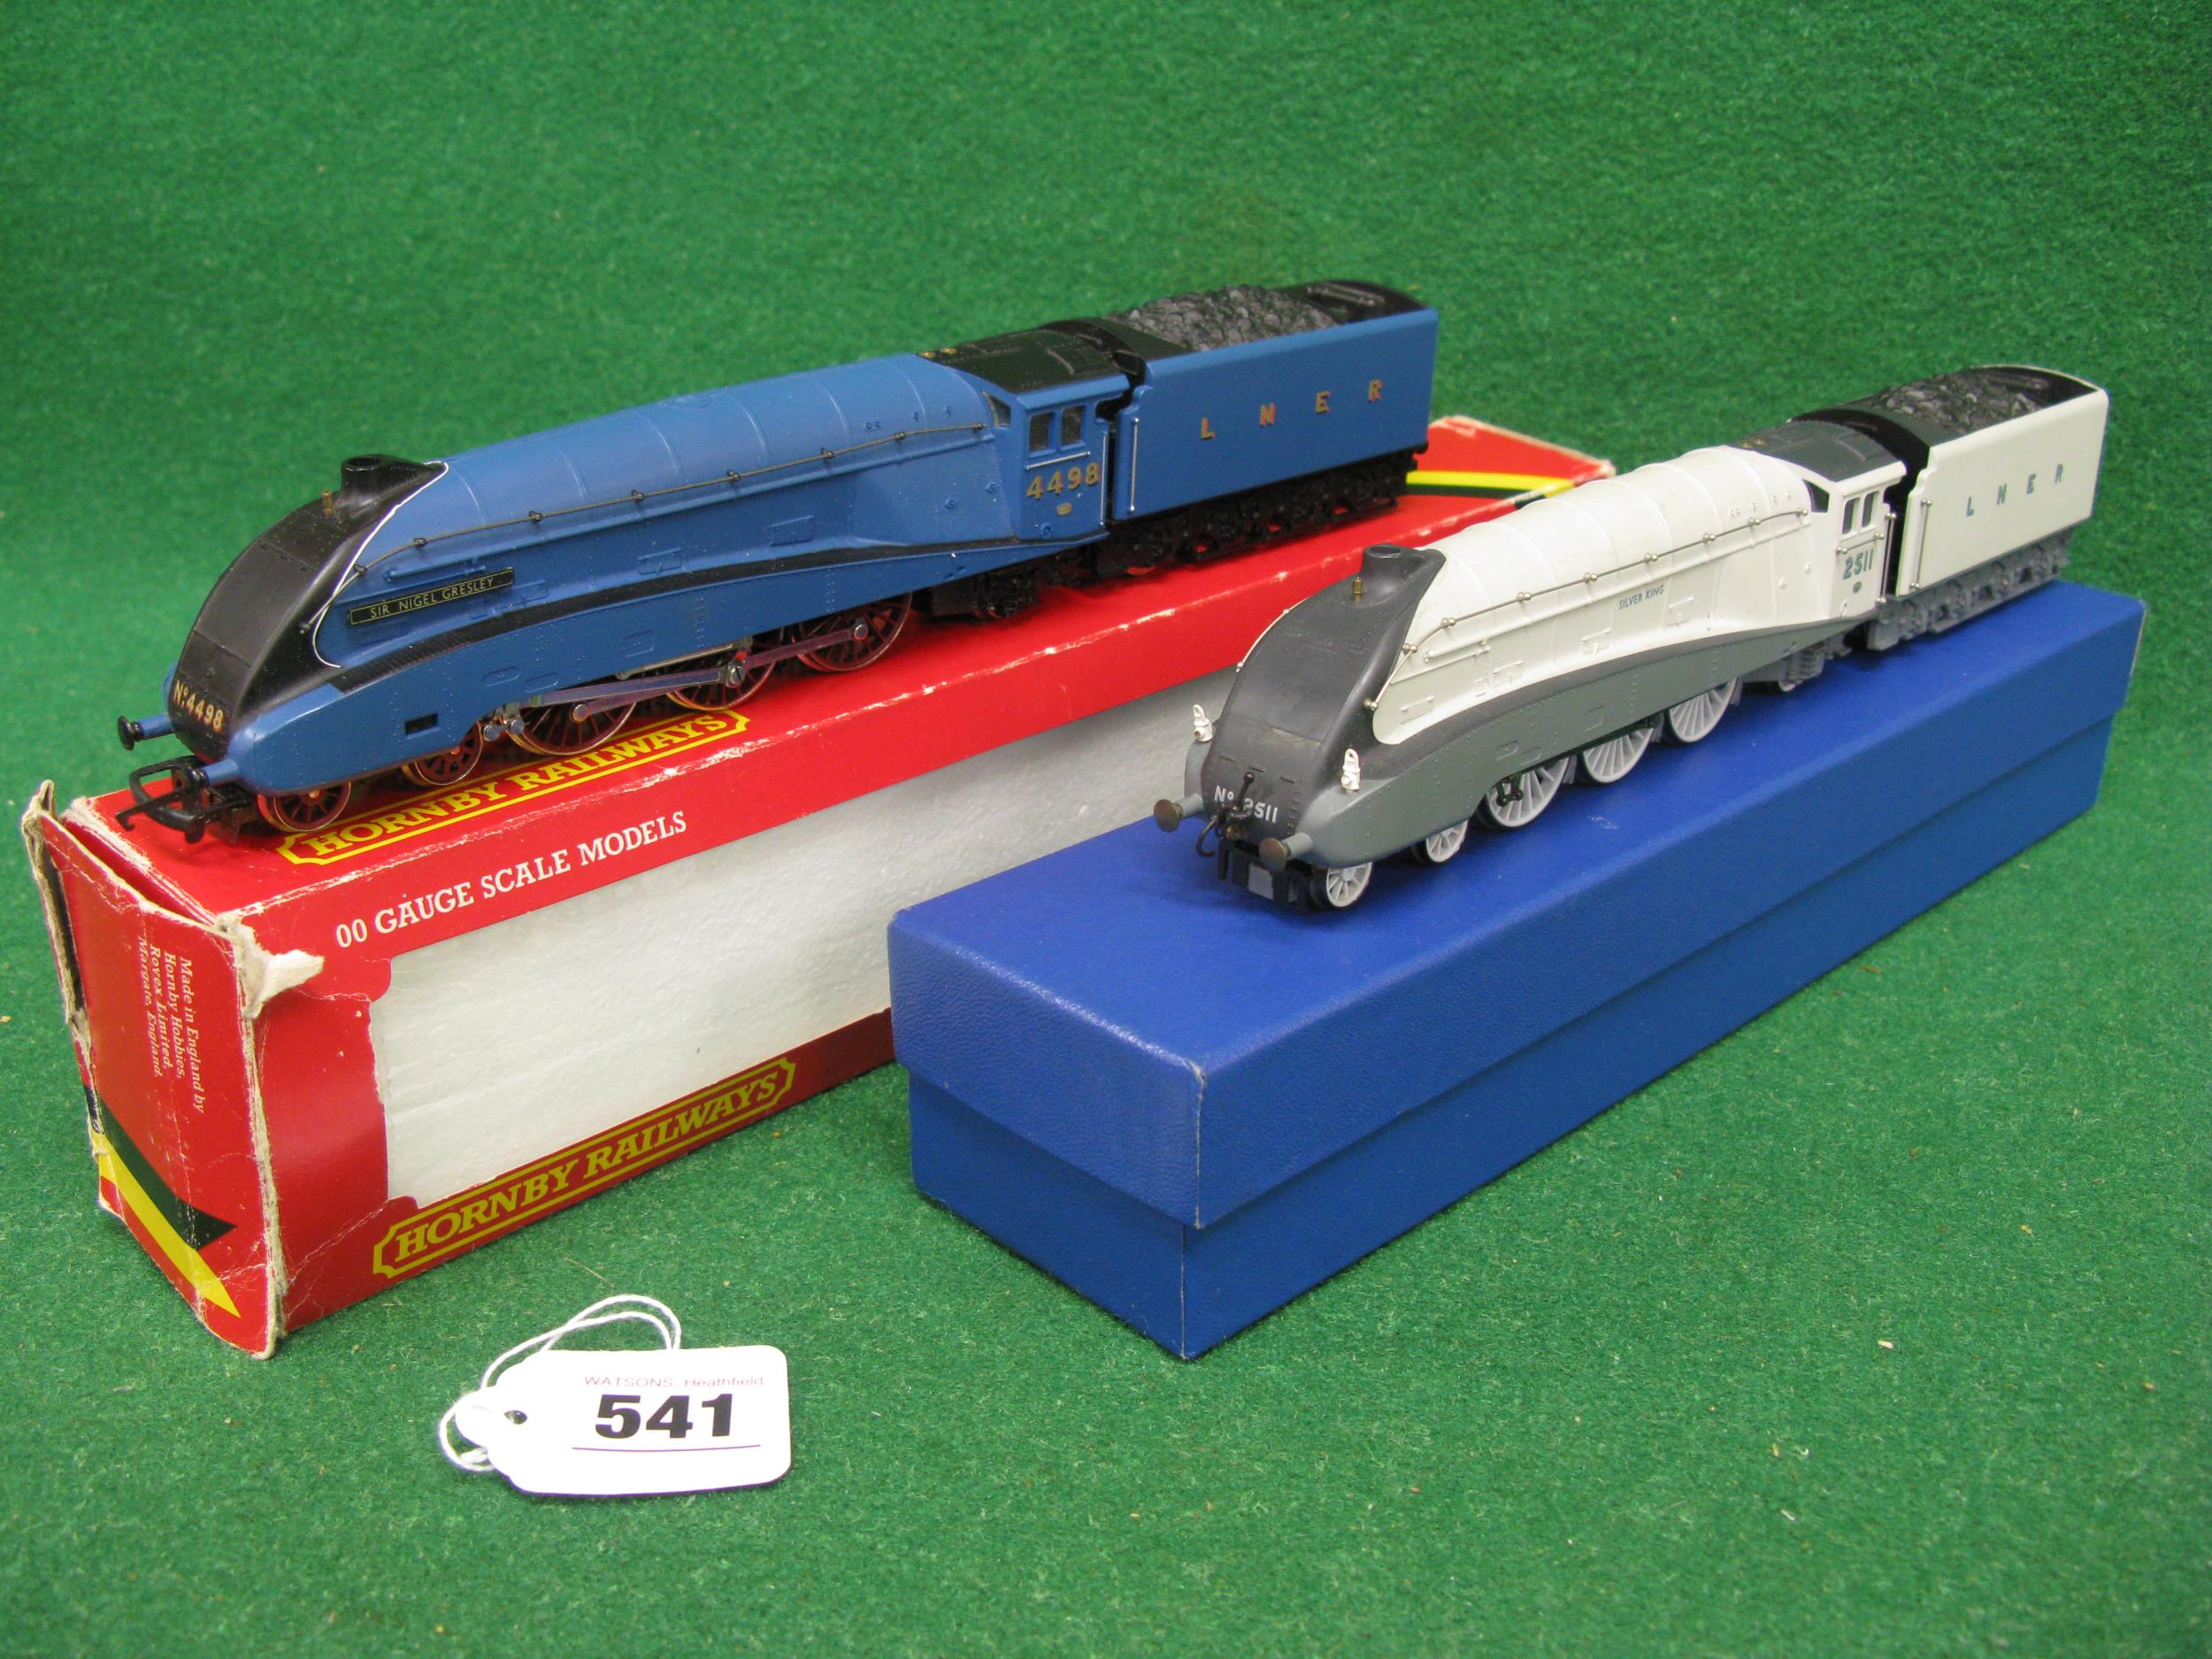 Two Hornby tender drive OO A4 Pacific's with valences to comprise: No. 4498 Sir Nigel Gresley in